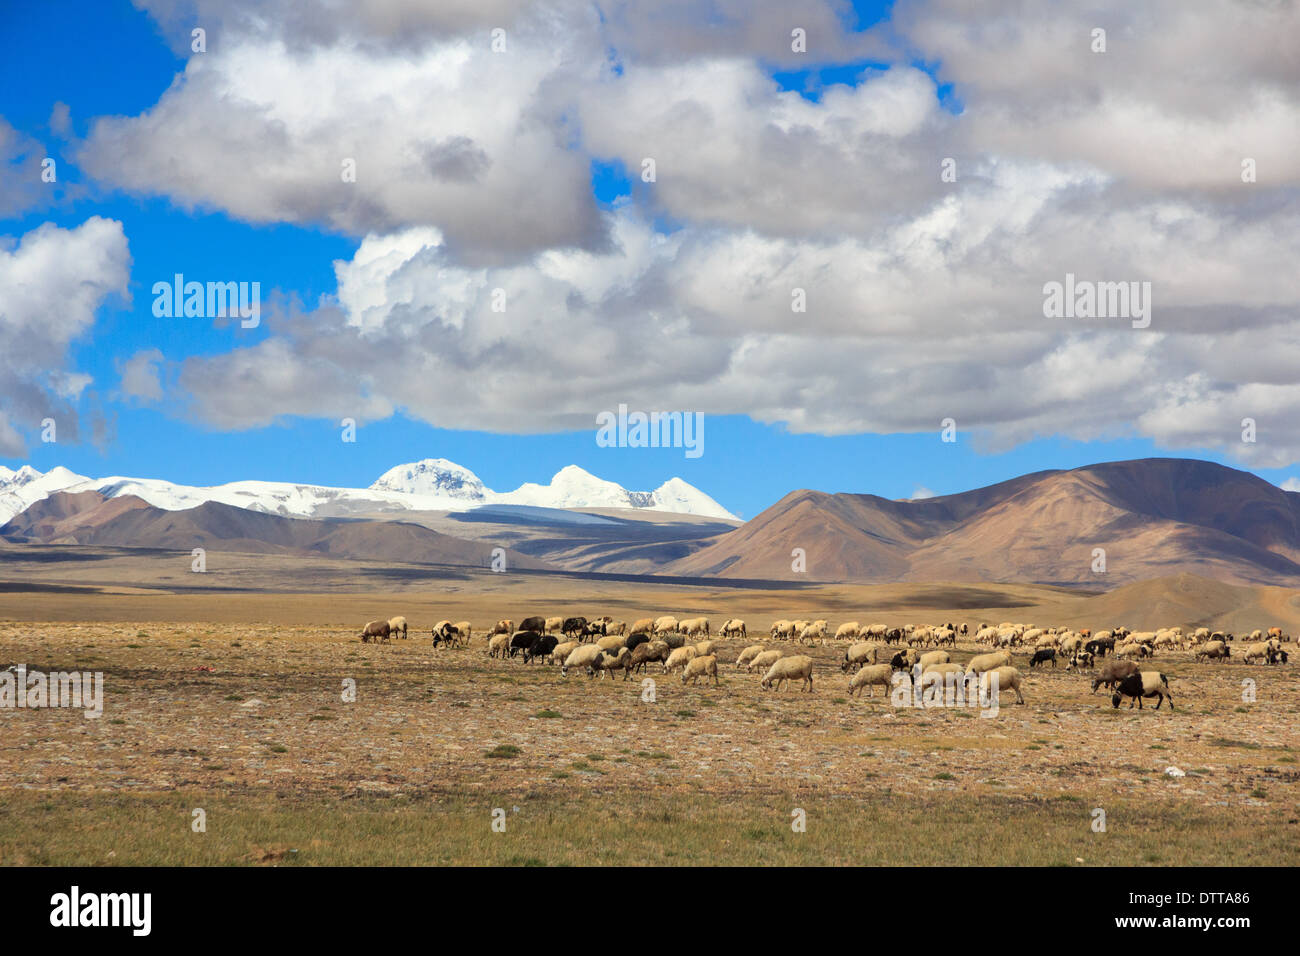 Sheep on Tibetan plateau on the grassland with snowy peaks of the Himalayas in the background Stock Photo